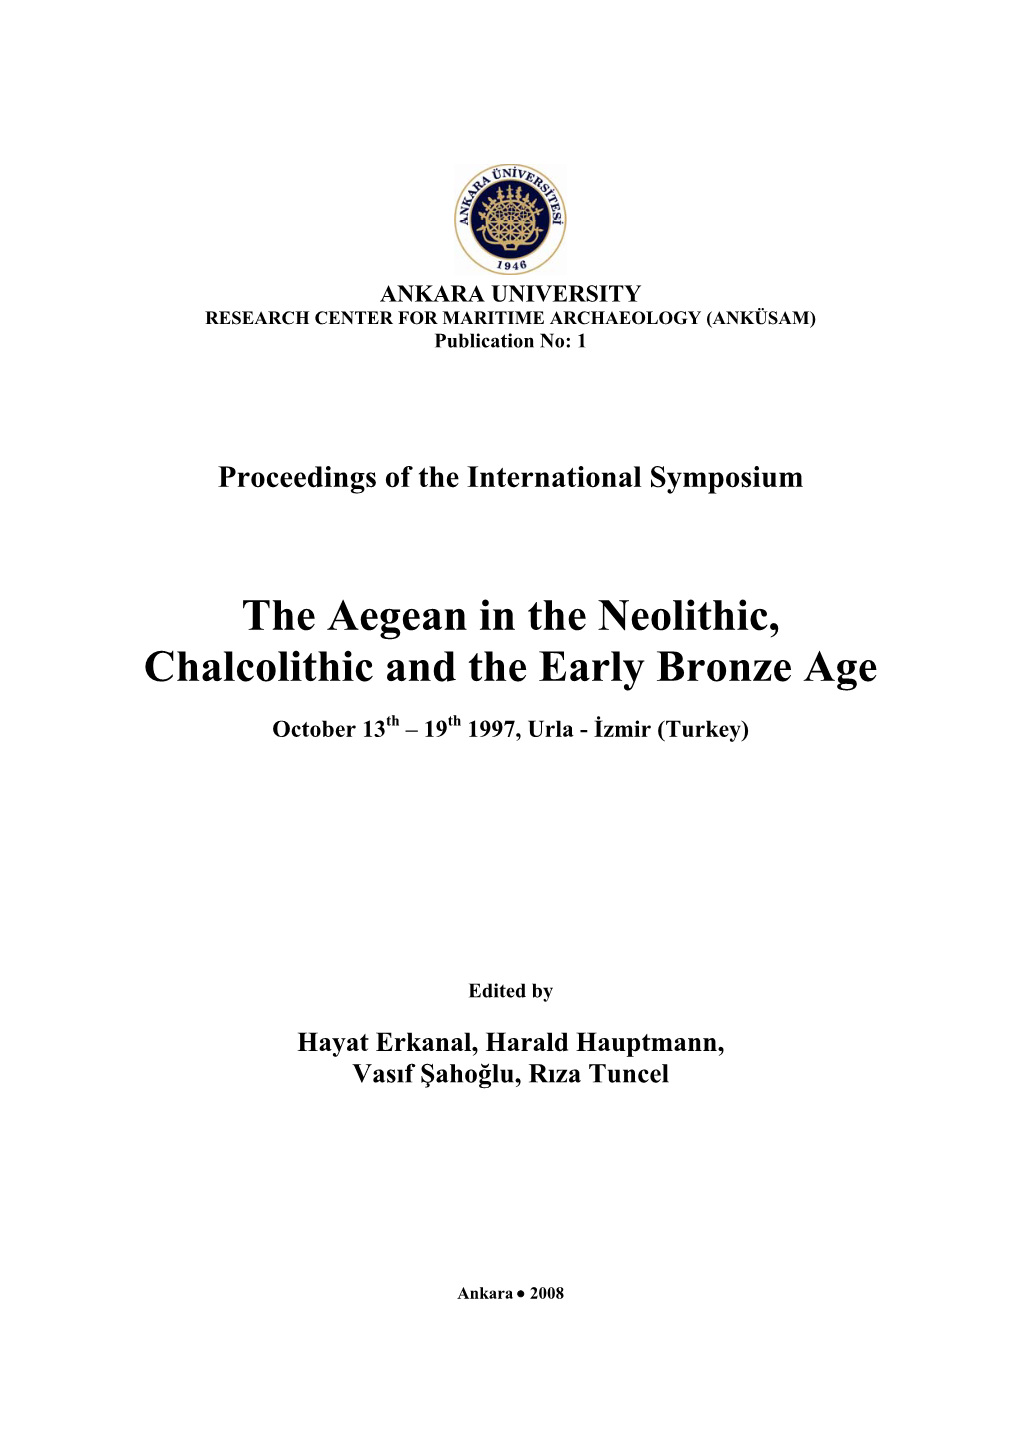 Their Relations in the Aegean Late Neolithic and Early Bronze Age ……………………